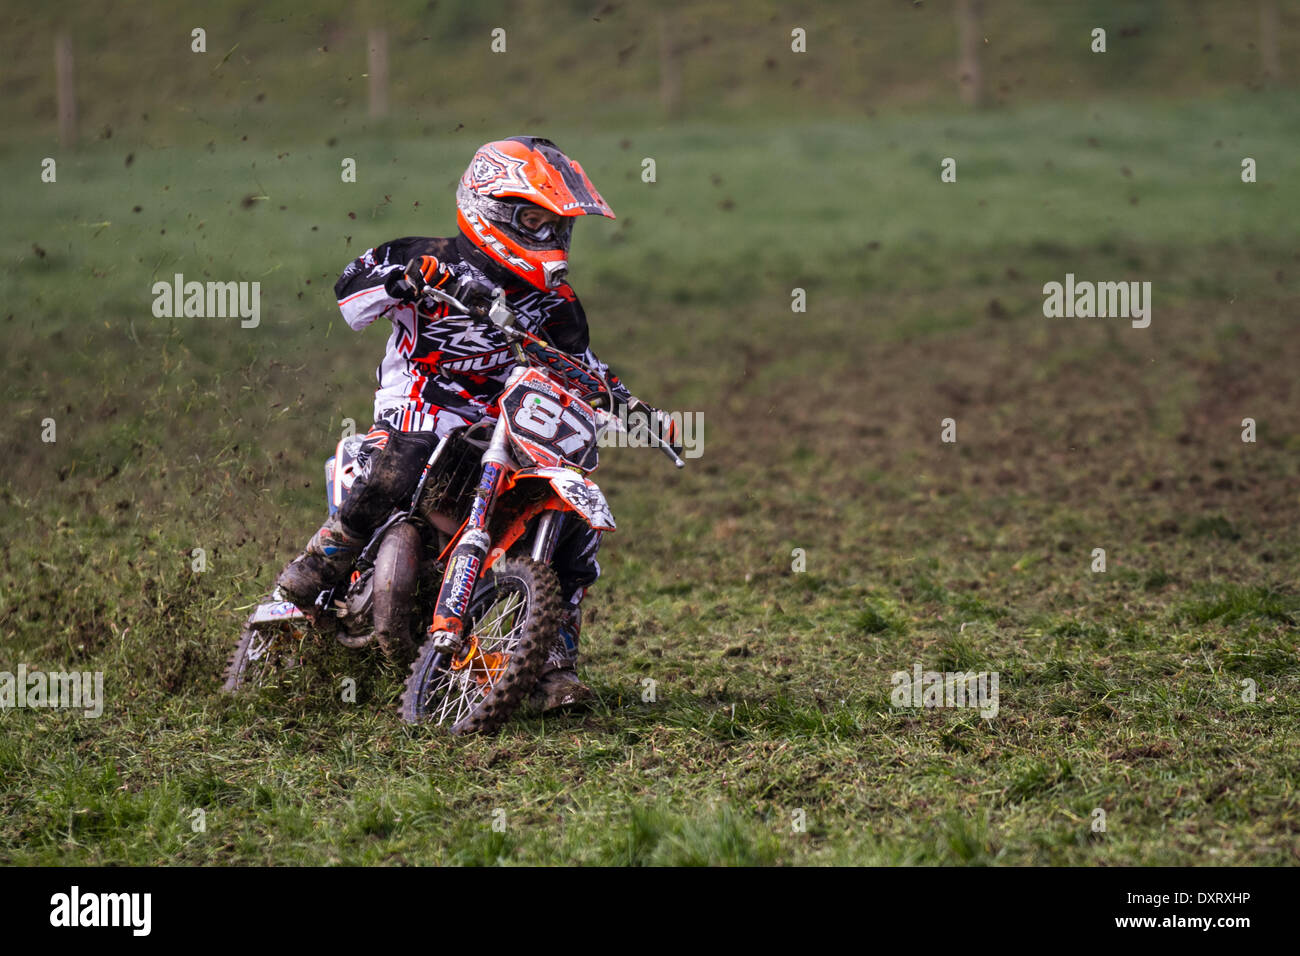 Youngsters grass track motorcycle riding in Much Hoole, Lancashire, UK March, 2014. Mickie Simpson MX65 rider and winner at the first ever meeting of the Lancashire Offroad Grasstrack Association held at Lower Marsh Farm, Much Hoole, Preston. A junior motorcycle race, grass track, speed, bike, motorbike, motorsport, power, winner, racing, motocross, competition, extreme sports, helmet, wheel, moto, sport, rider, cross, fun, jump, riding, sports, trail, dirt, fast event held under the National Sporting Code rules of the ACU standing regulations for grass tracks. Stock Photo